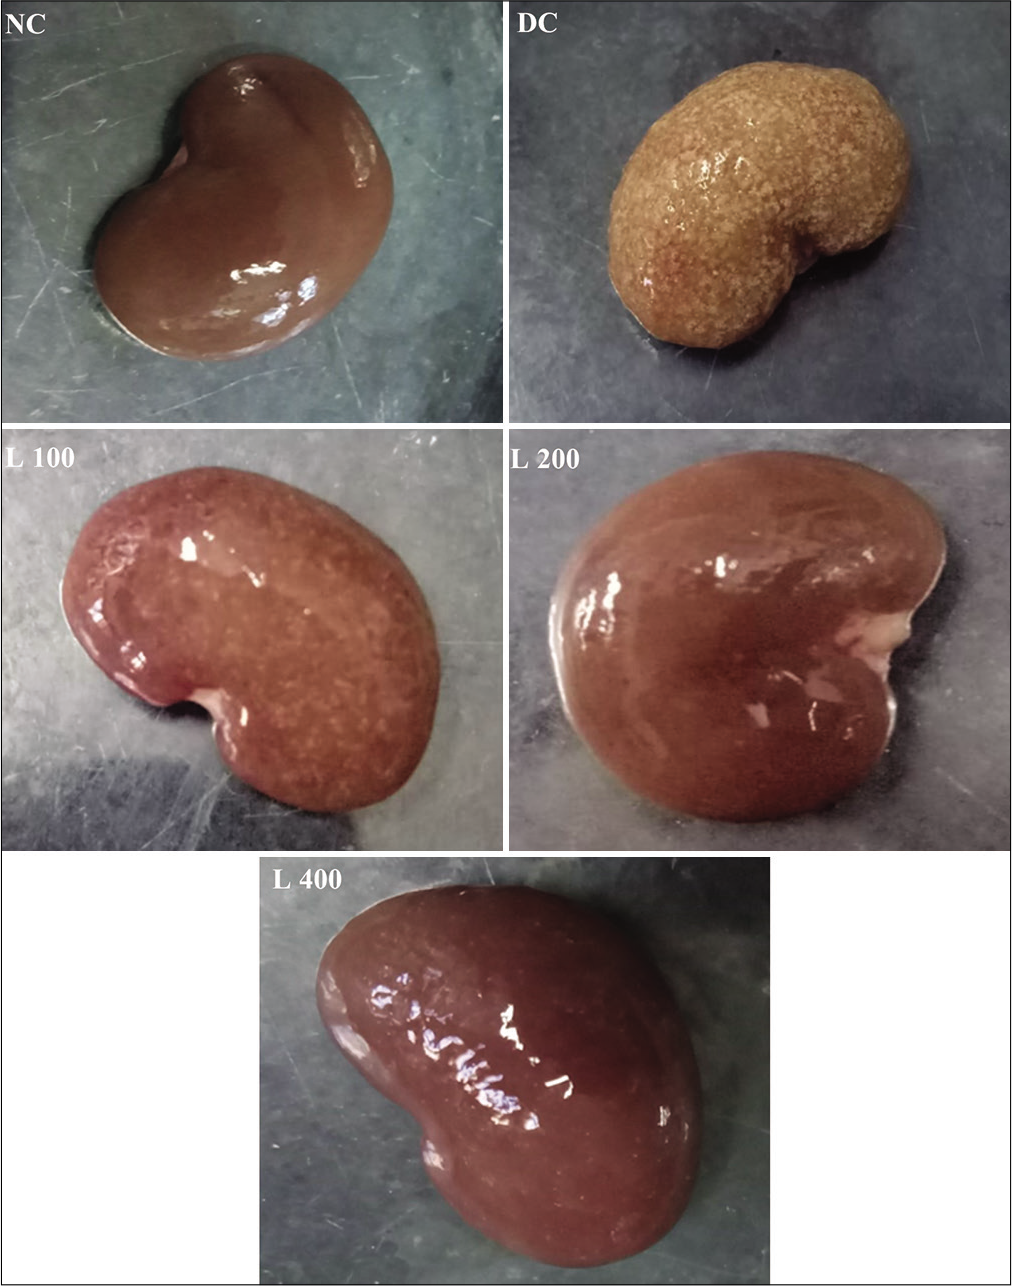 Effect of lycopene on gross morphology of kidney in adenine-induced chronic renal failure in rat. NC: Normal control, DC: Diseases control, L 100: 100 mg/kg Lycopene+Adenine, L 200: 200 mg/kg Lycopene+Adenine, L 400: 400 mg/kg Lycopene+Adenine.